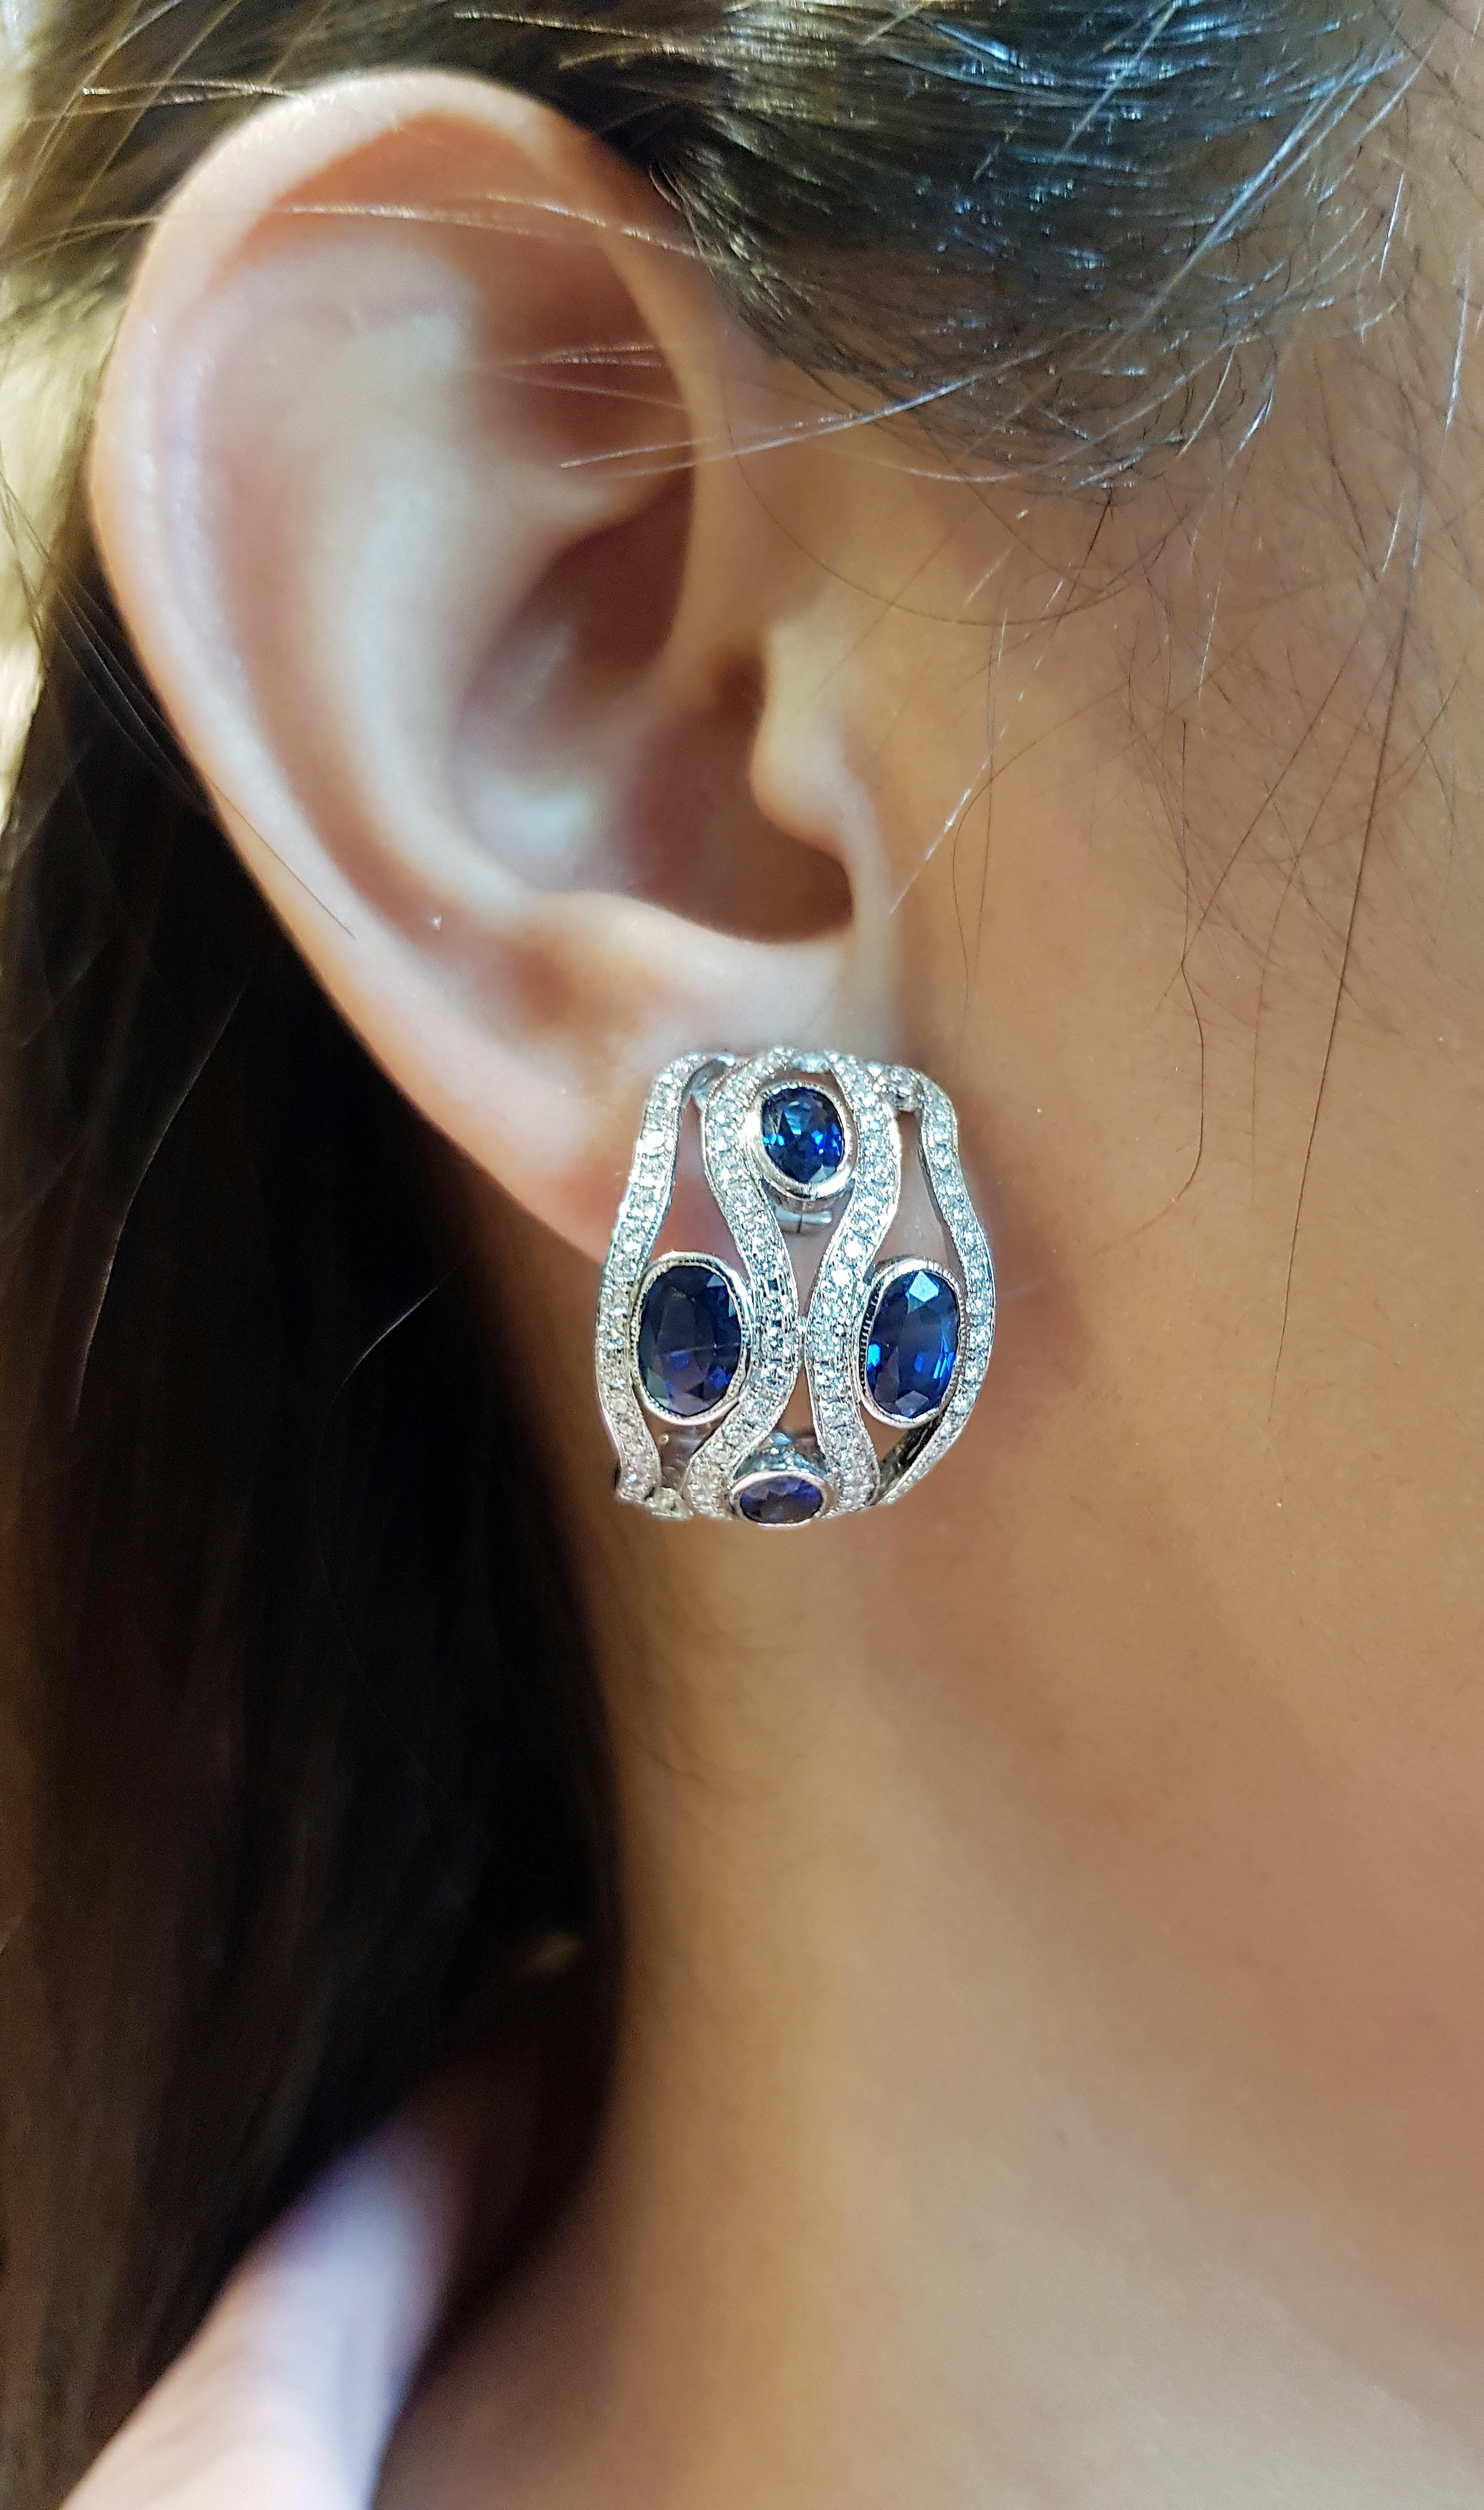 Blue Sapphire 6.0 carats with Diamond 1.66 carats Earrings set in 18 Karat White Gold Settings

Width:  1.9 cm 
Length: 2.1 cm
Total Weight: 14.4 grams

